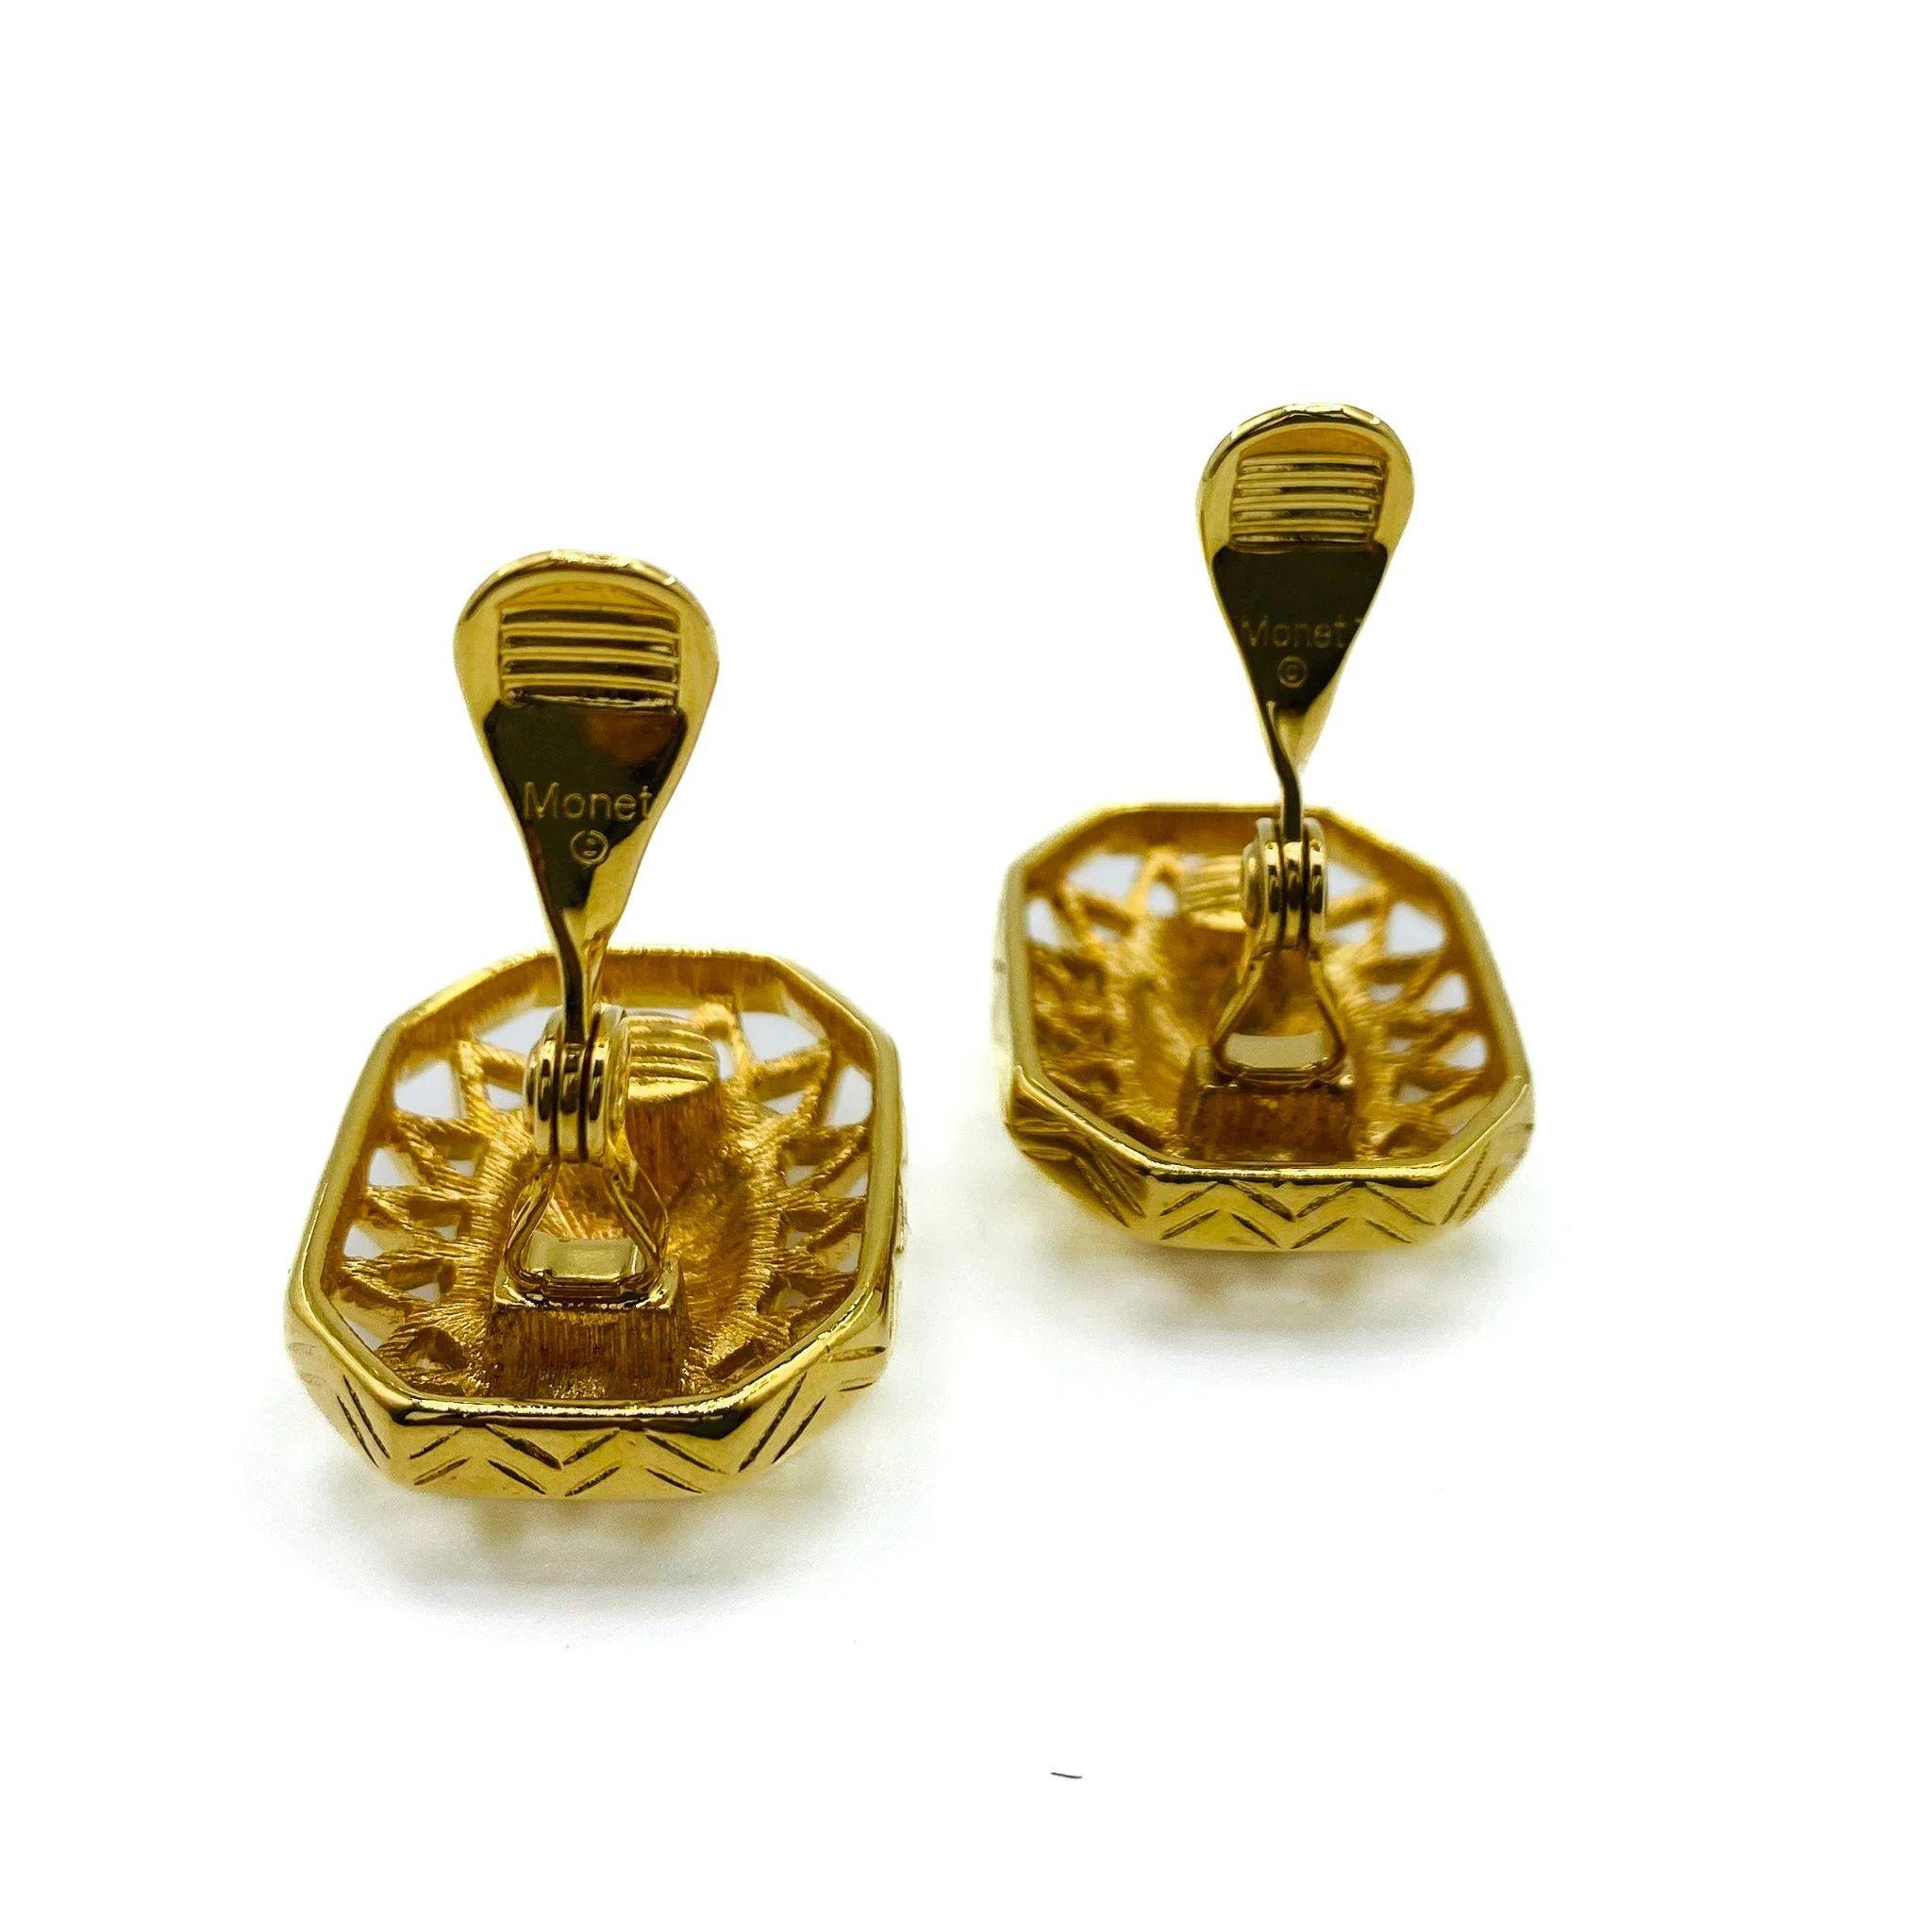 Vintage Monet Clip On Earrings 1980s

Elevate your look with these statement vintage clip-on earrings from Monet, a world-famous costume jeweller. Made in the USA from high-quality gold-plated metal, these earrings are a testament to the brand's